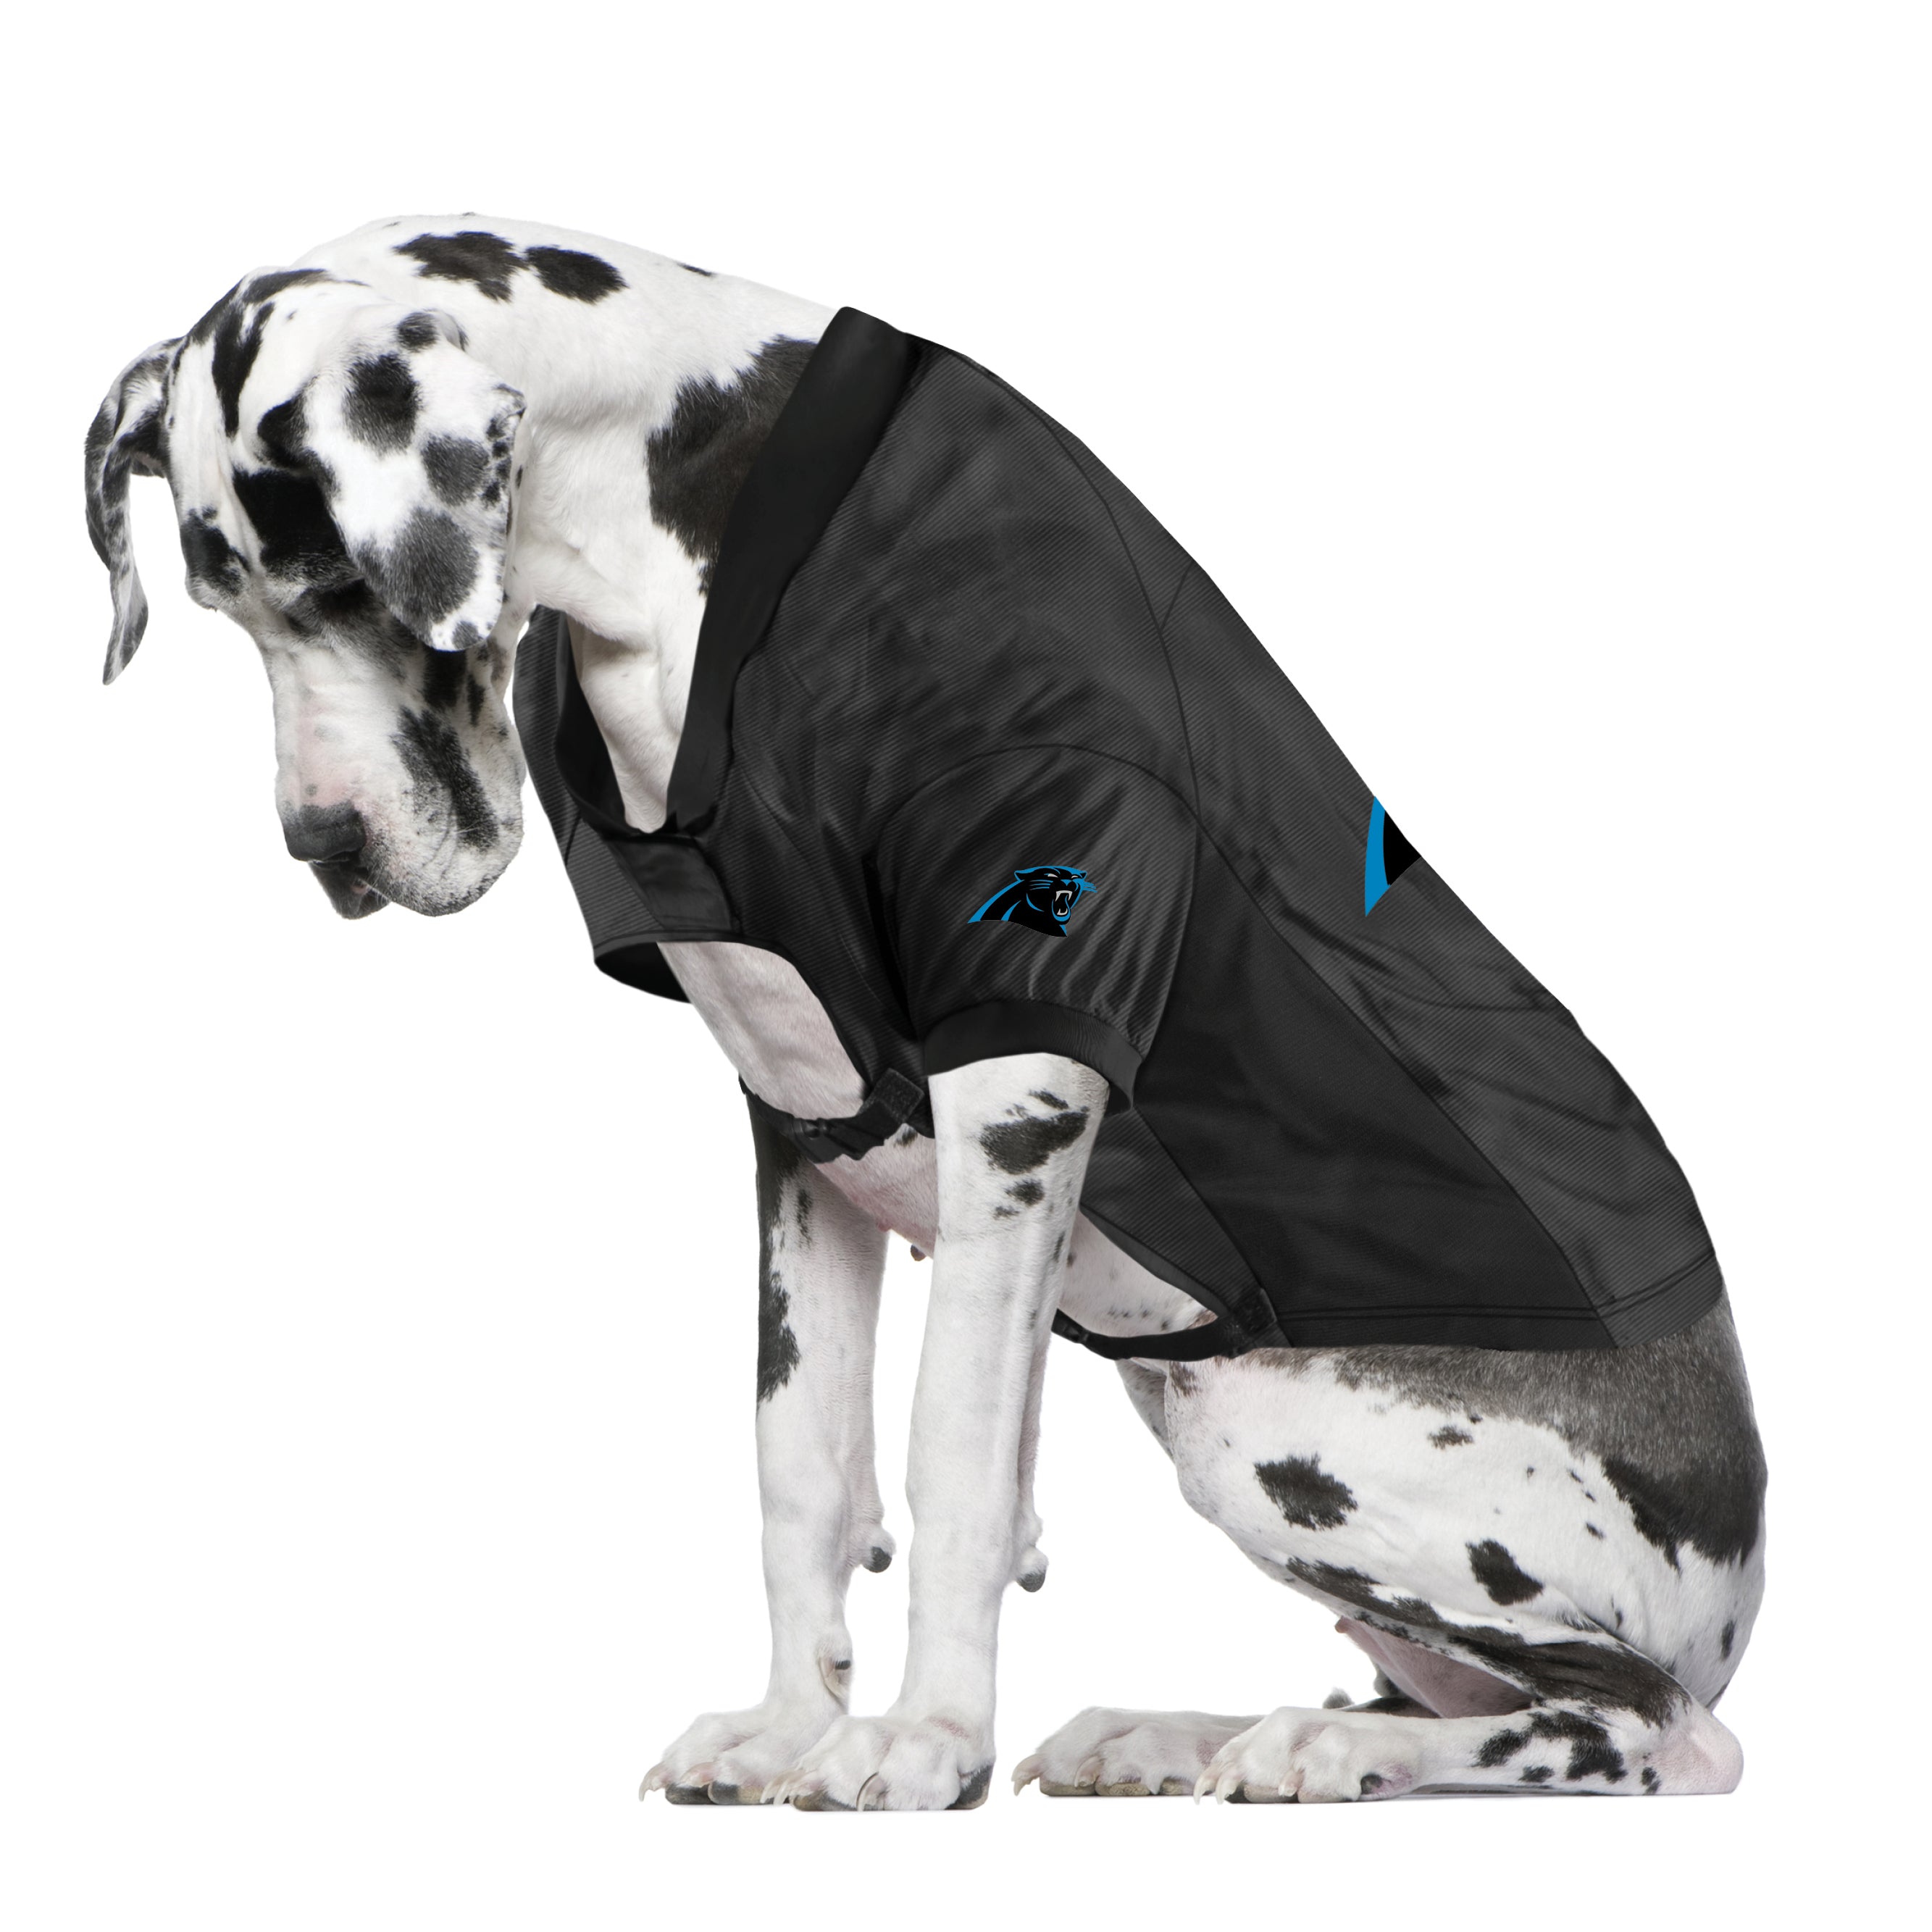 carolina panthers jersey for dogs